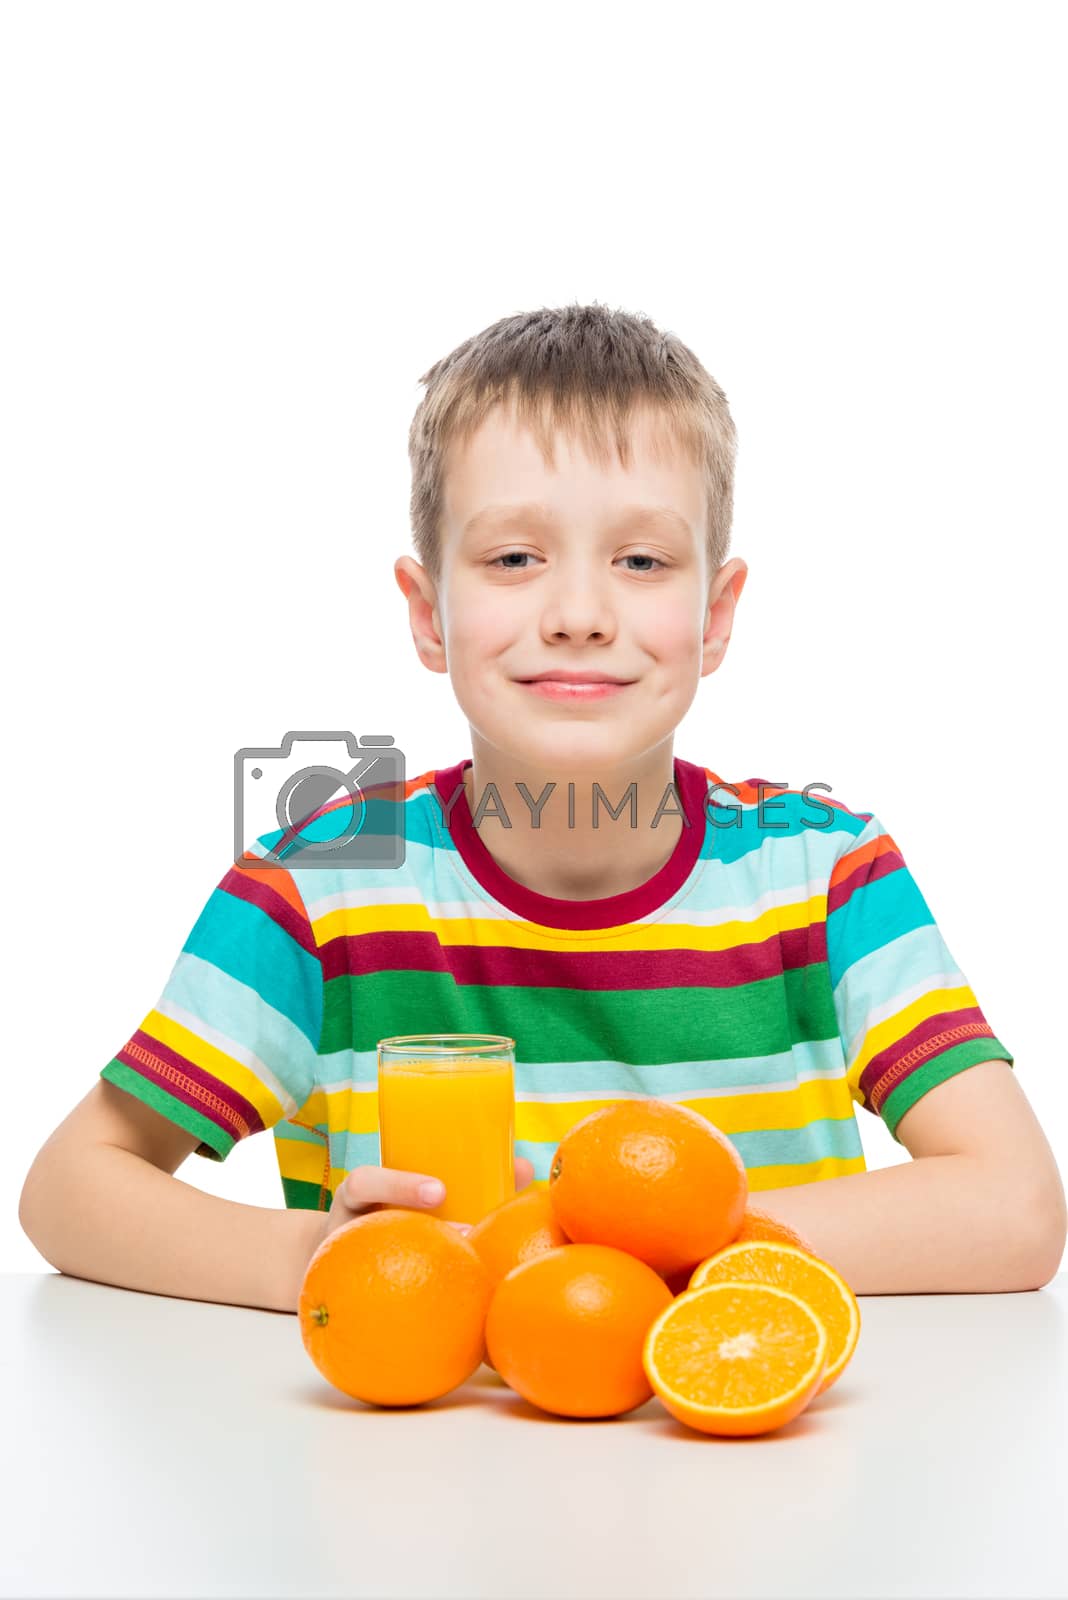 Royalty free image of boy with oranges and a glass of fresh orange juice at the table by kosmsos111